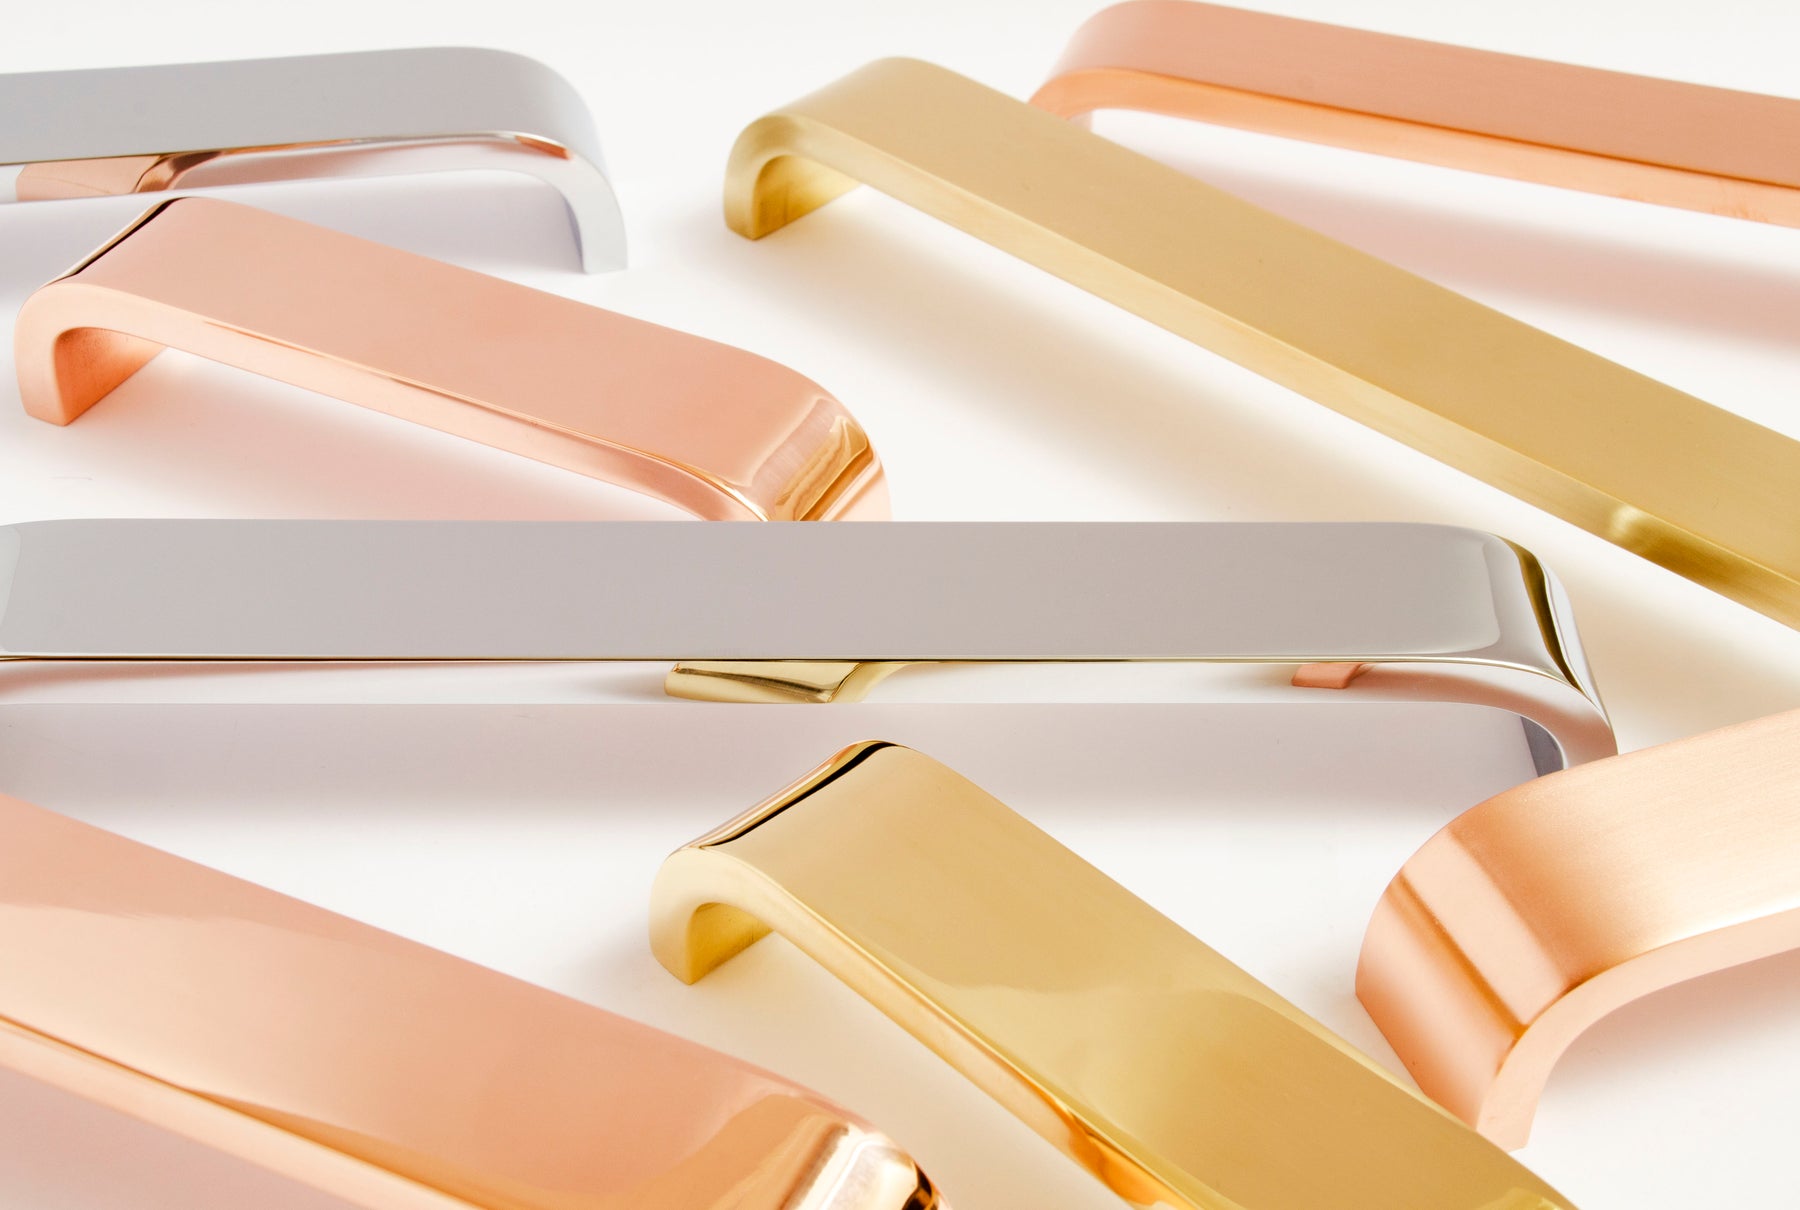 Curved cabinet hardware handles made of brass copper and polished stainless steel